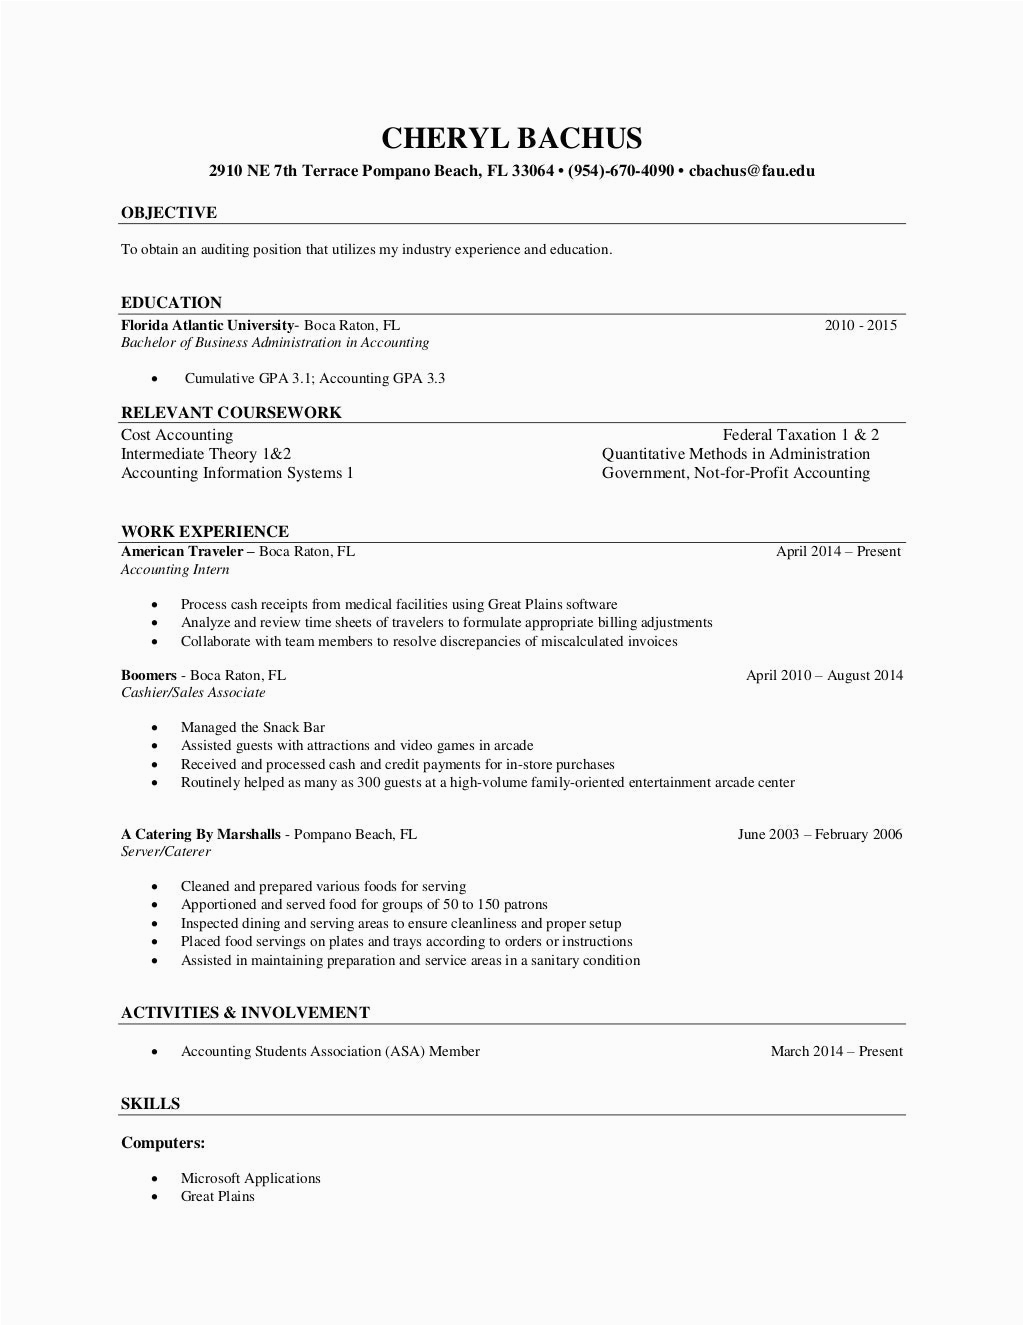 Sample Resumes for Full Time Jobs Resume Accounting Full Time Employment